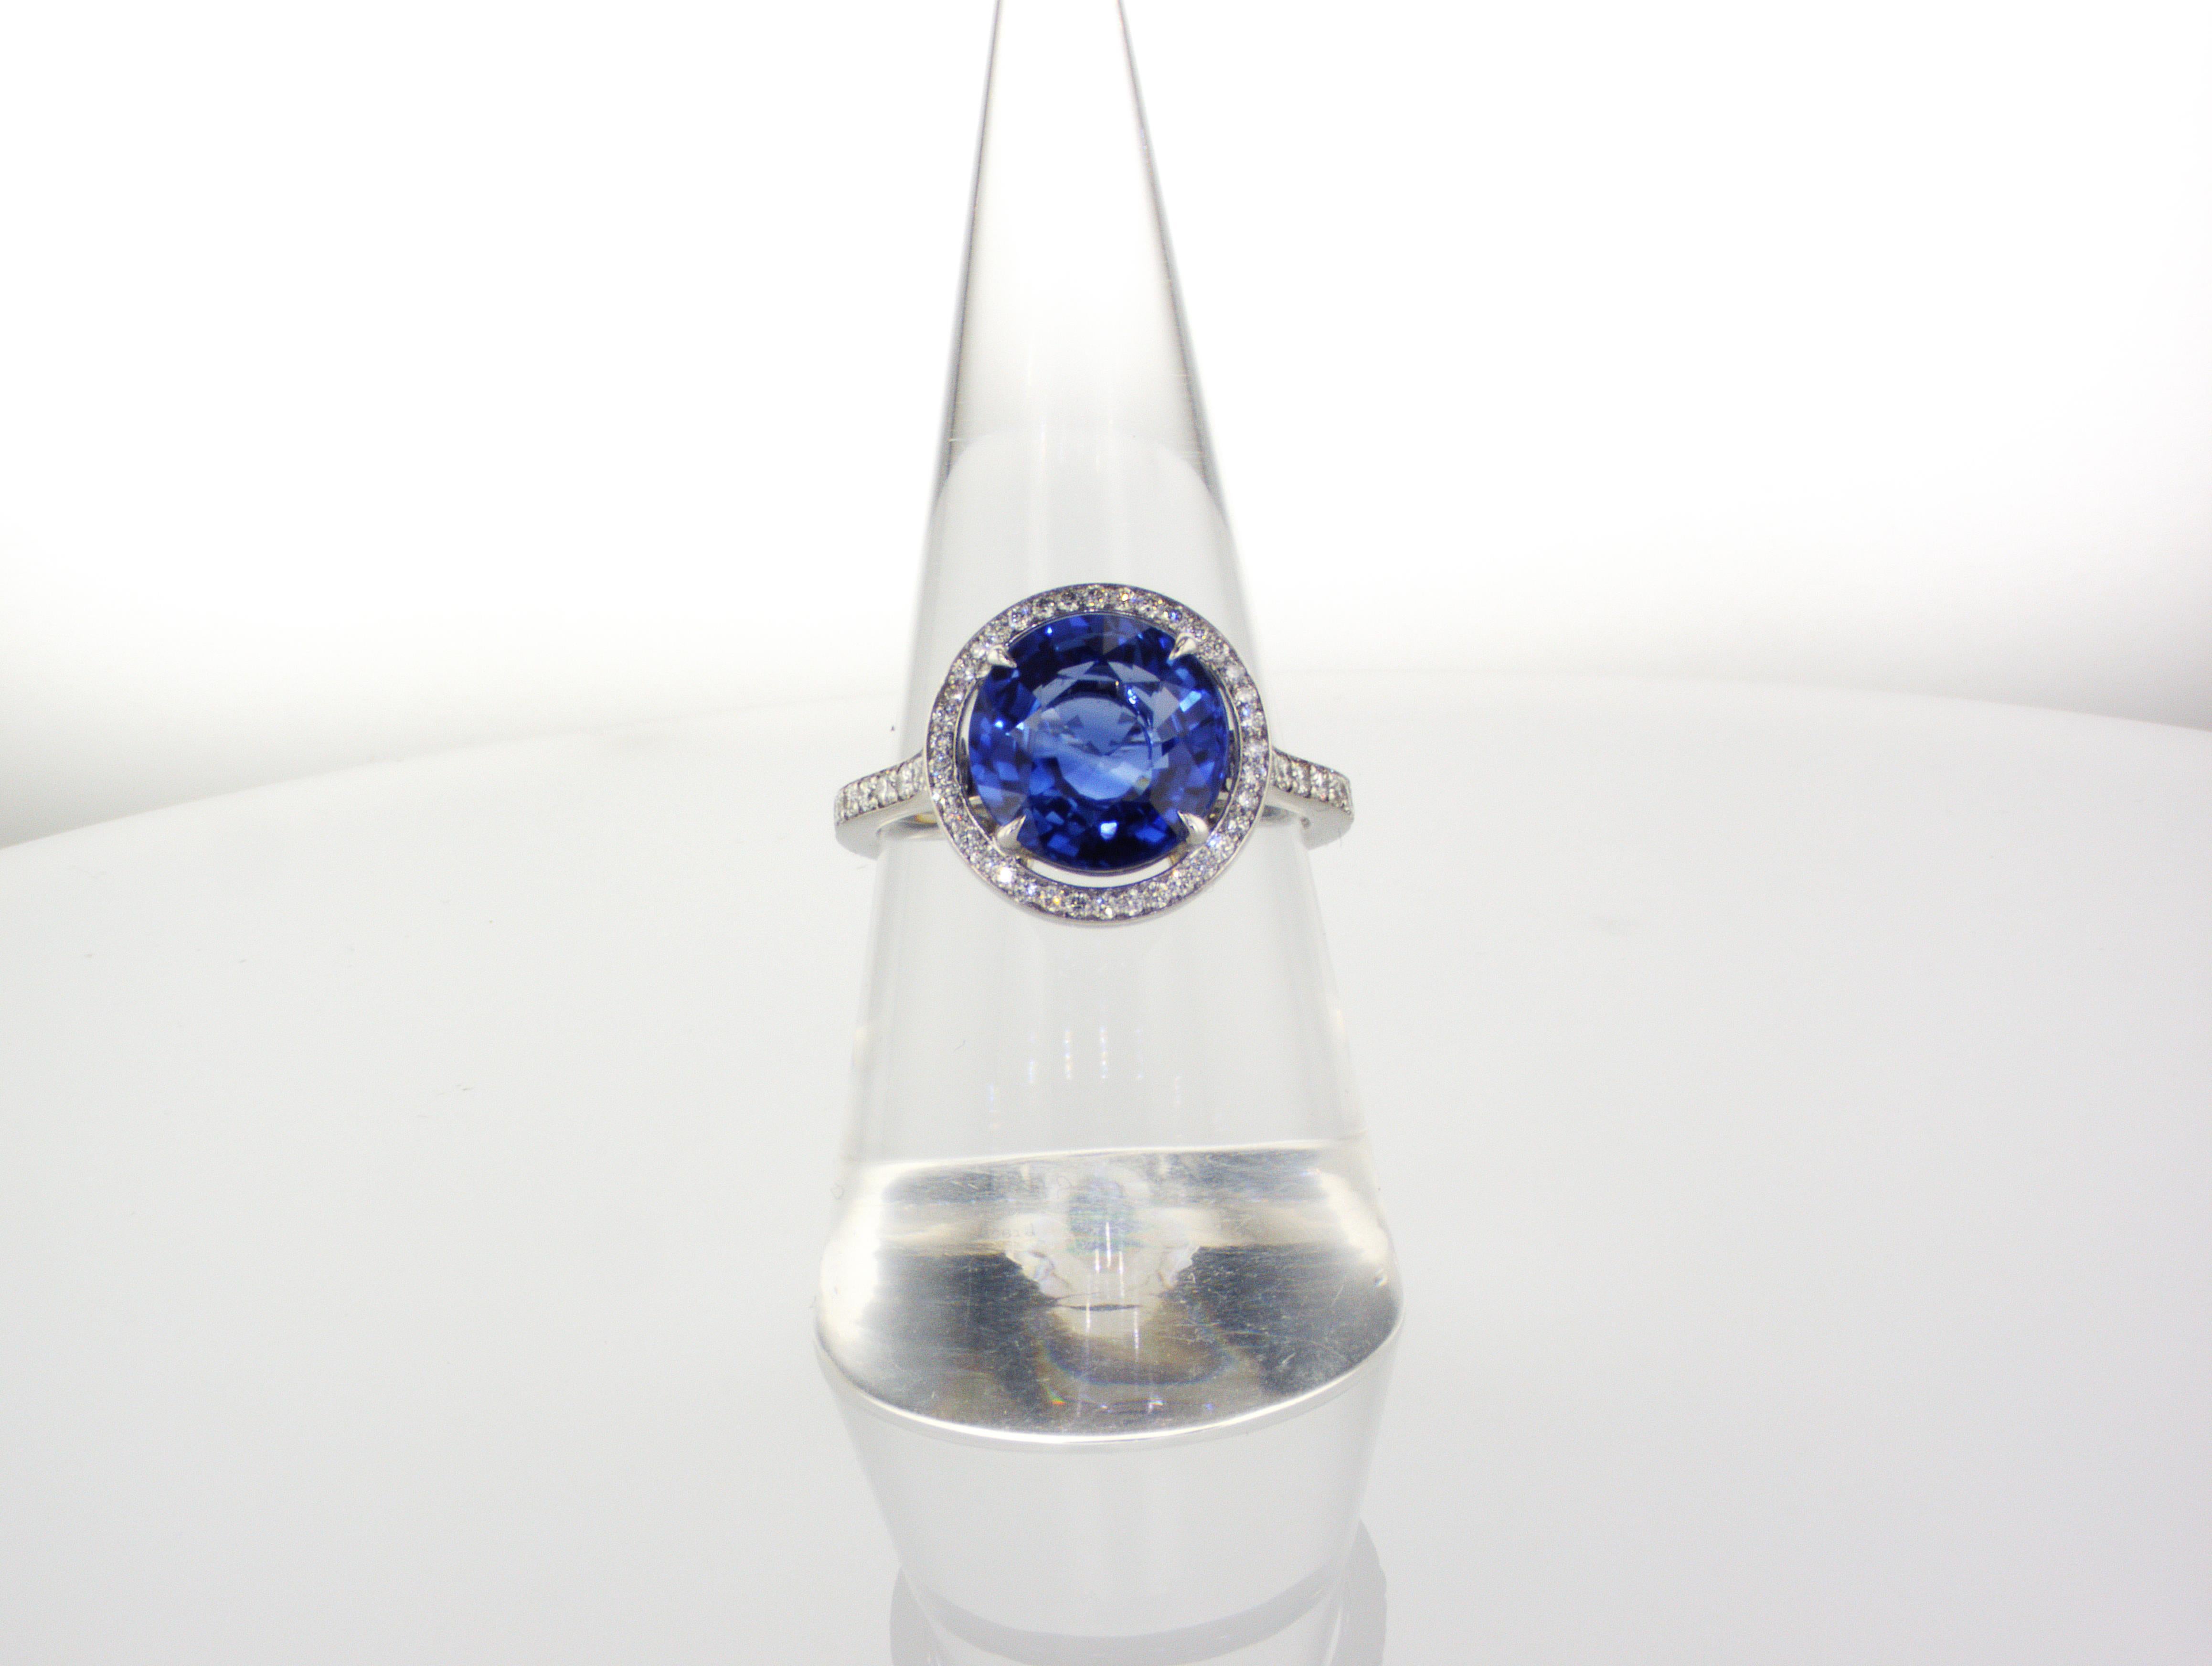 Platinum Diamond Ring with 4.20 ct Round Vivid Blue (Royal Blue) Sapphire and 0.28 ct Diamonds. This World Class magnificent Sapphire can attract the attention of any person. The ring is set in PT950 (prongs white gold 18 CT) and diamonds. Certified